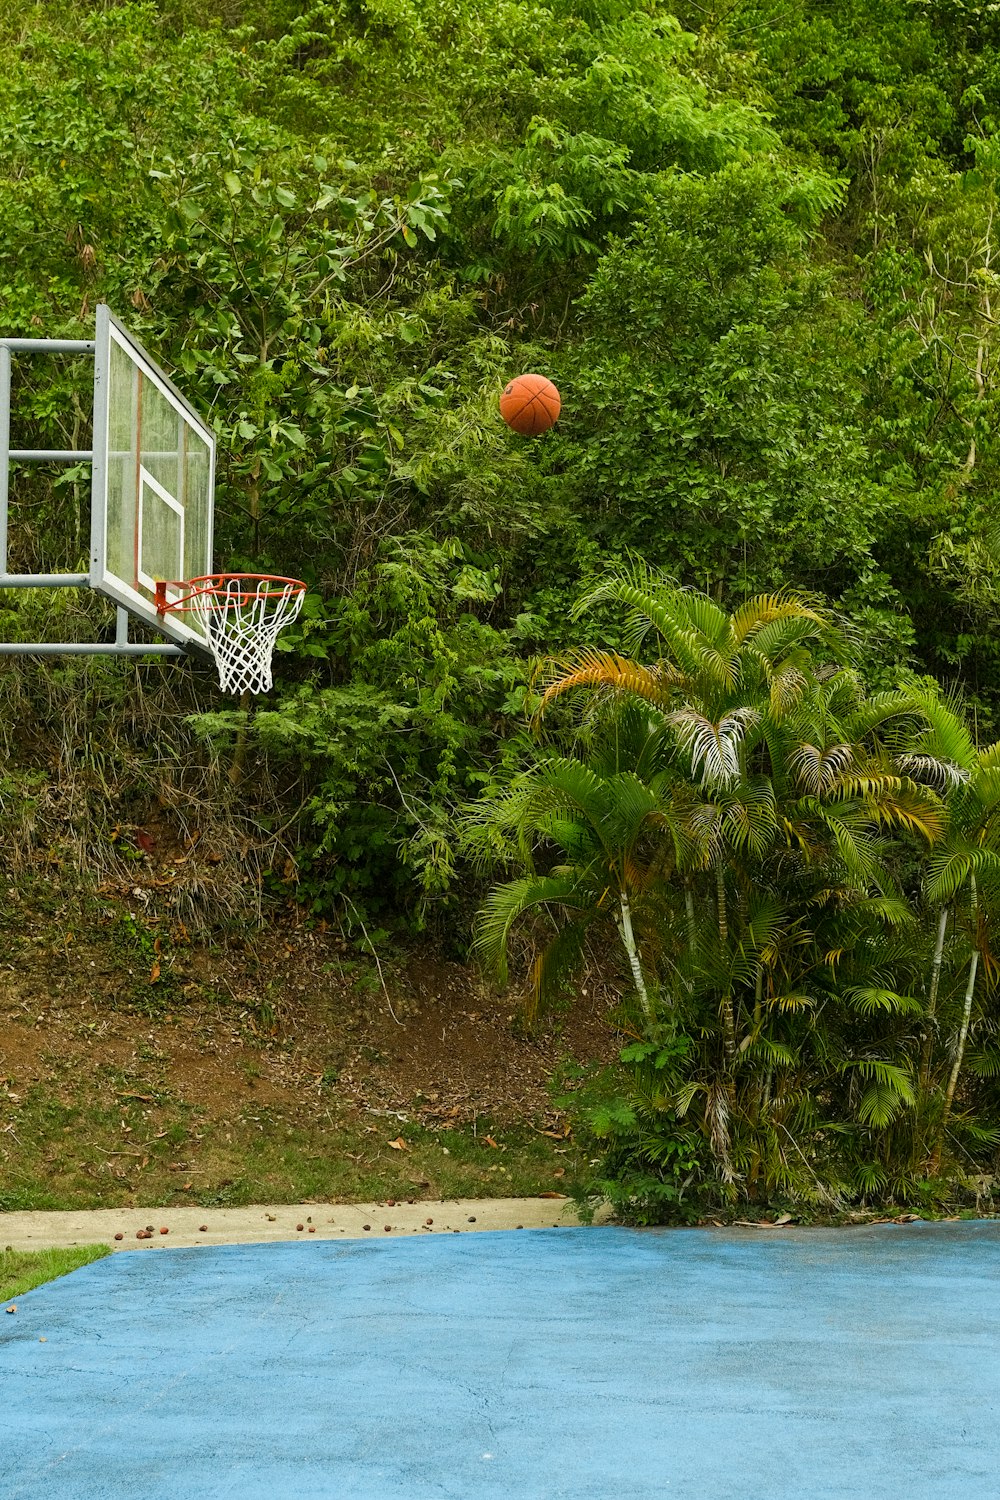 a basketball court with a basketball in the air